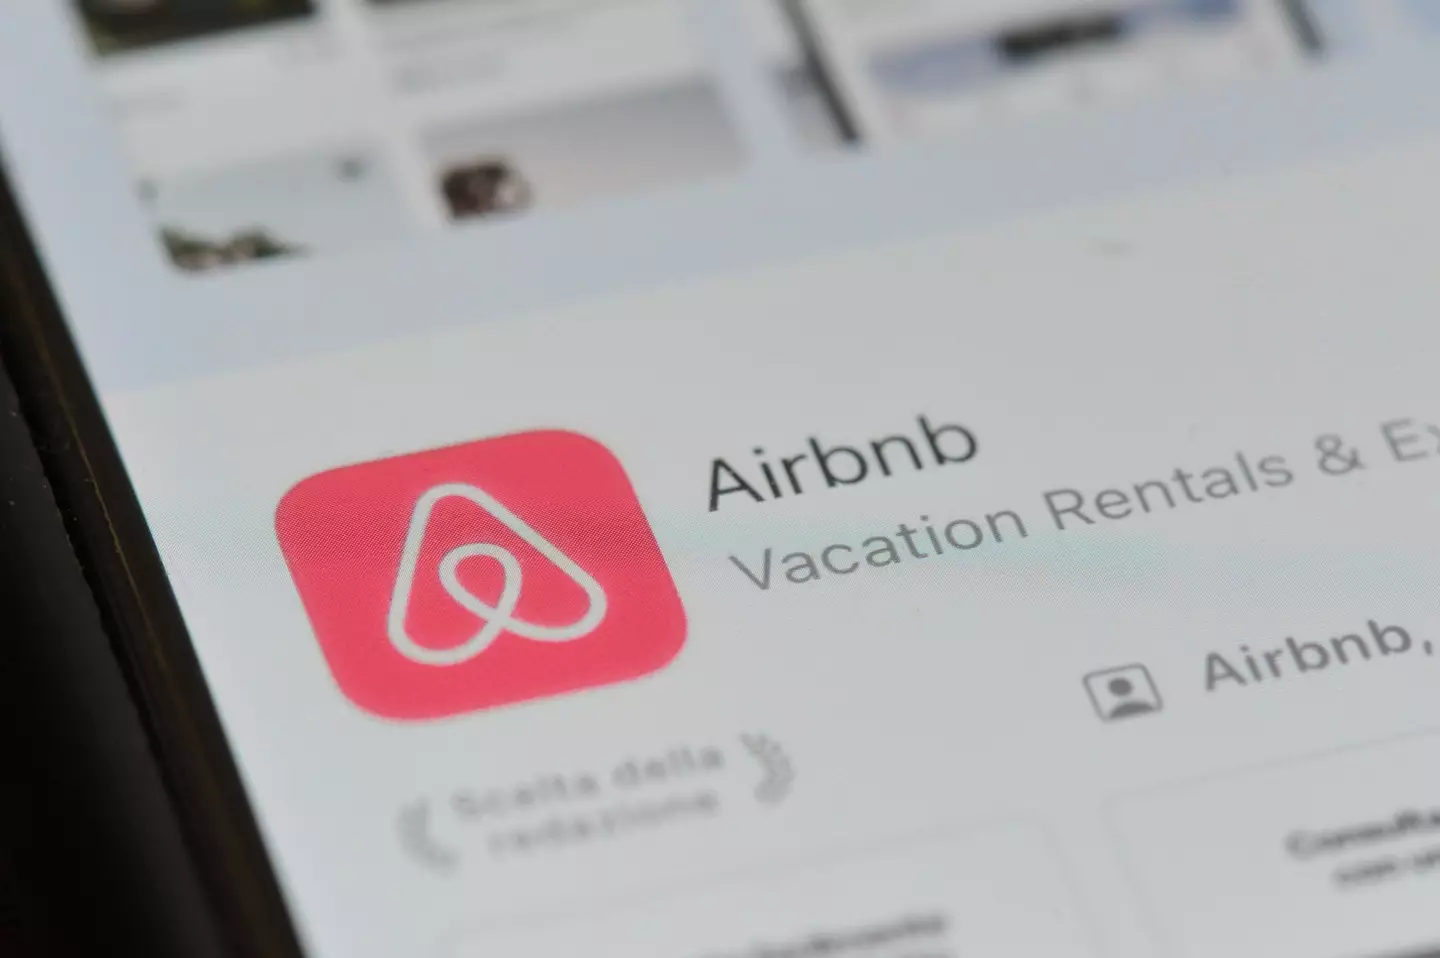 Many argued that Airbnb hosts can charge too much for cleaning fees.